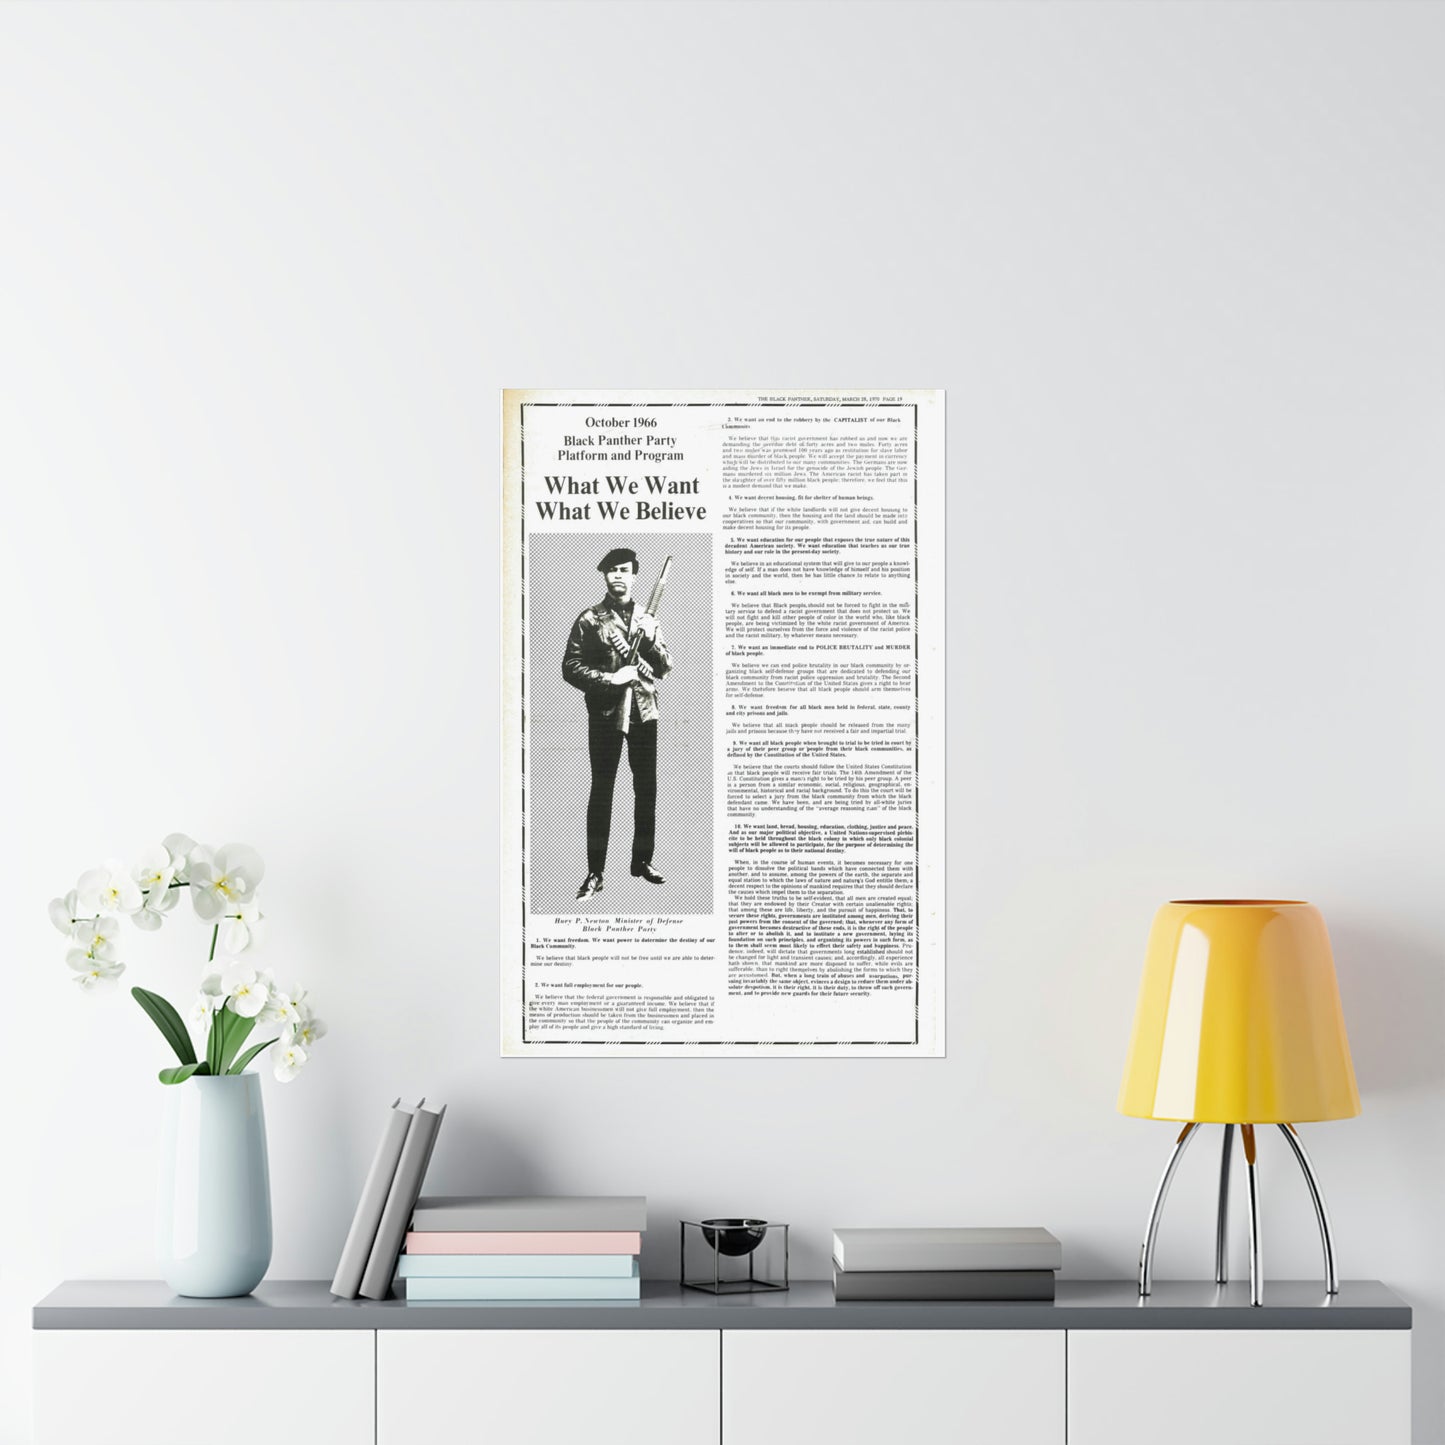 1971 Black Panther Political Party Demands, Propaganda Poster, Black Art Gifts Wall Decor, Civil Rights Liberal Political Memorabilia, Vintage History, African American Styles